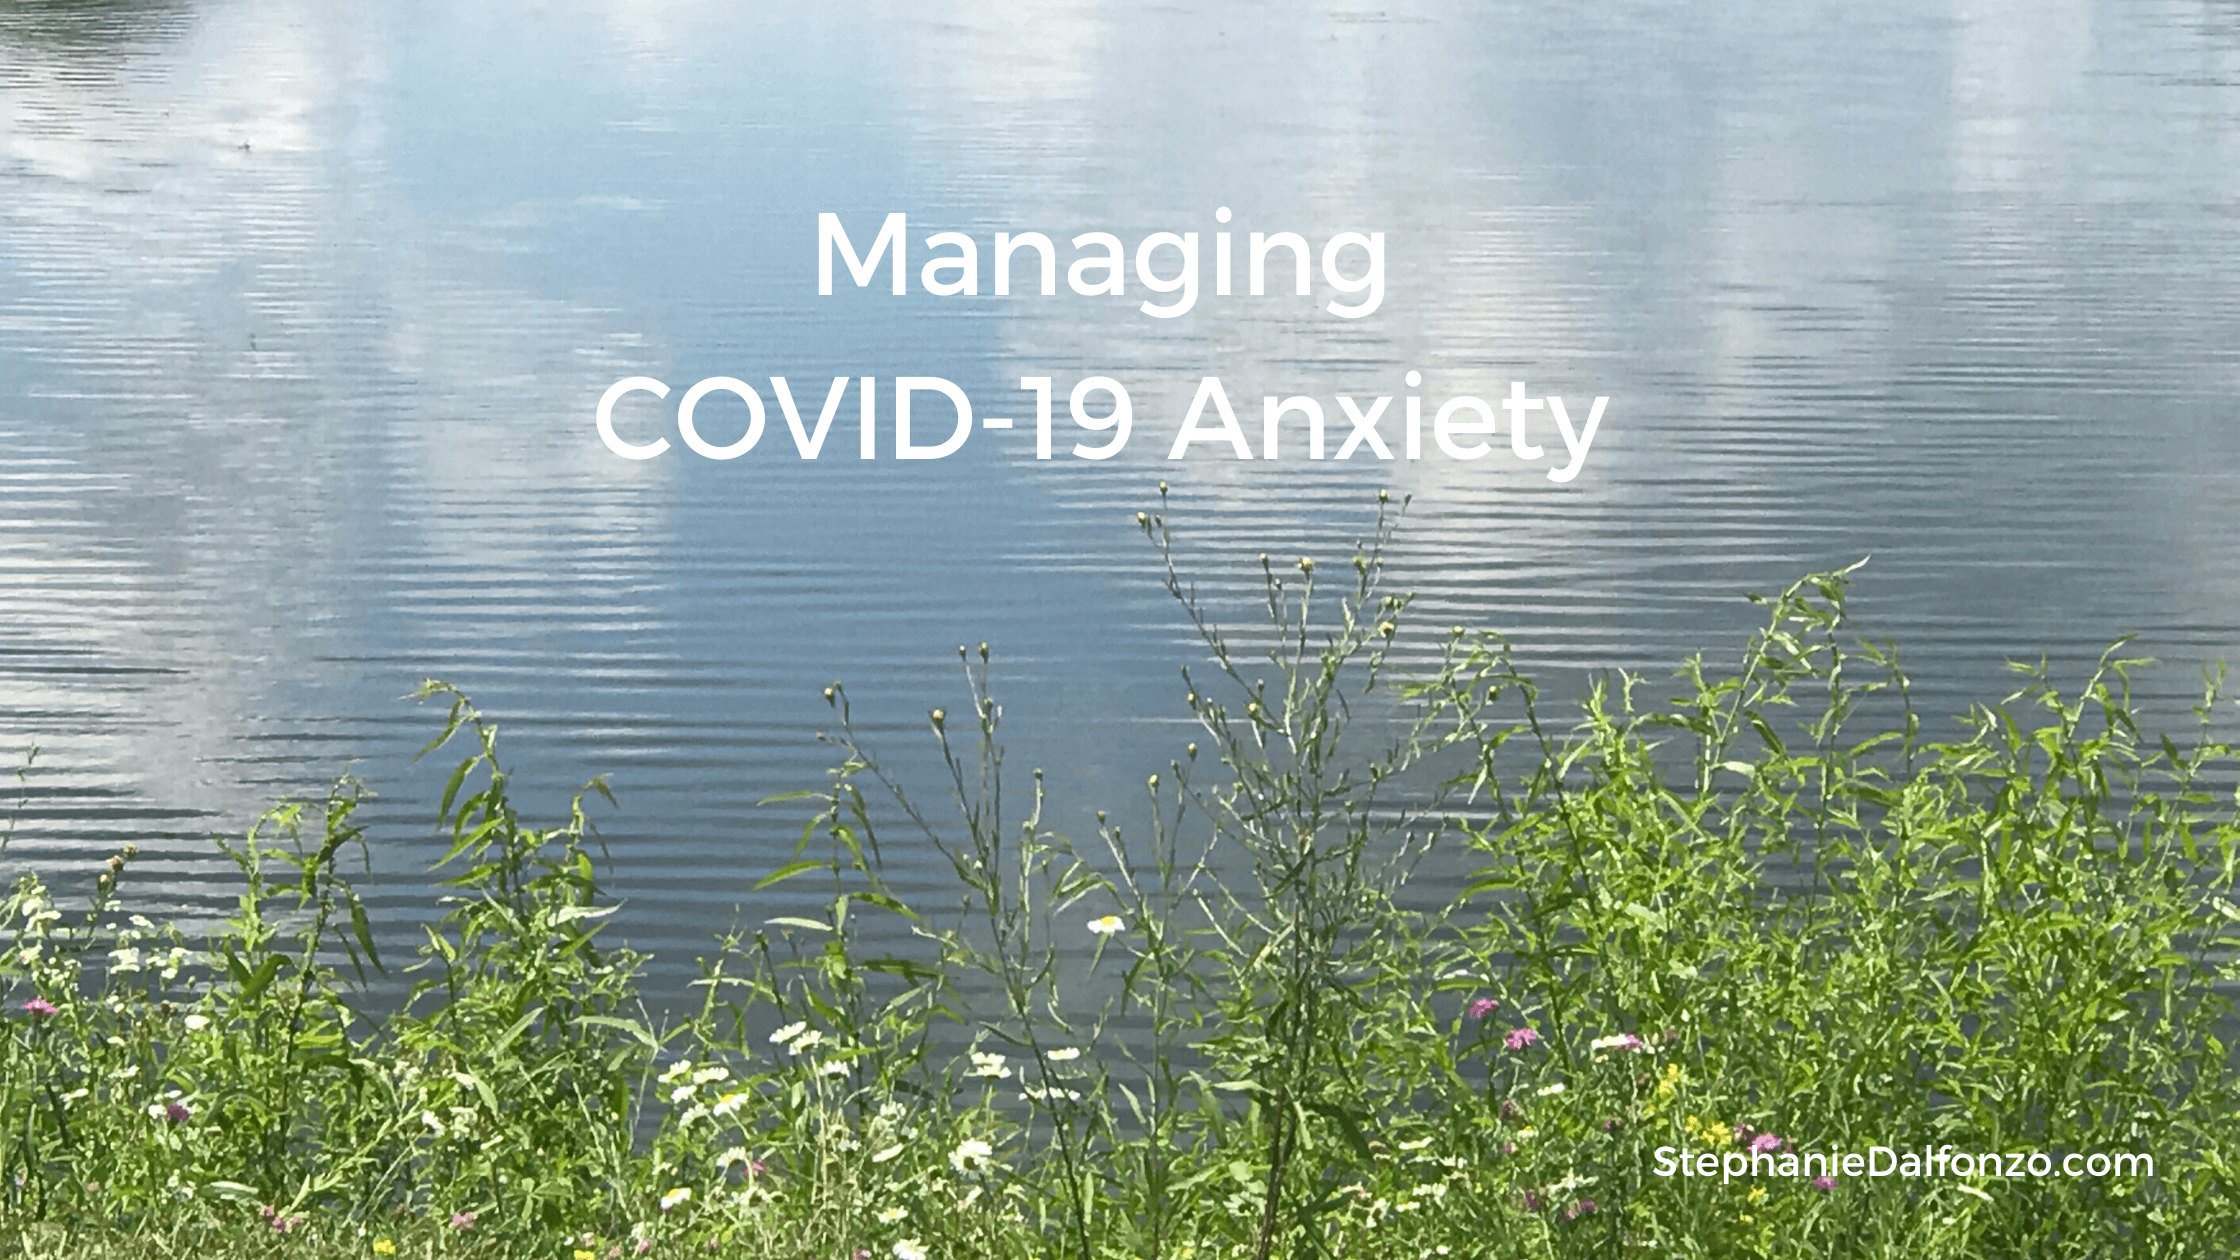 How to deal with anxiety during coronavirus